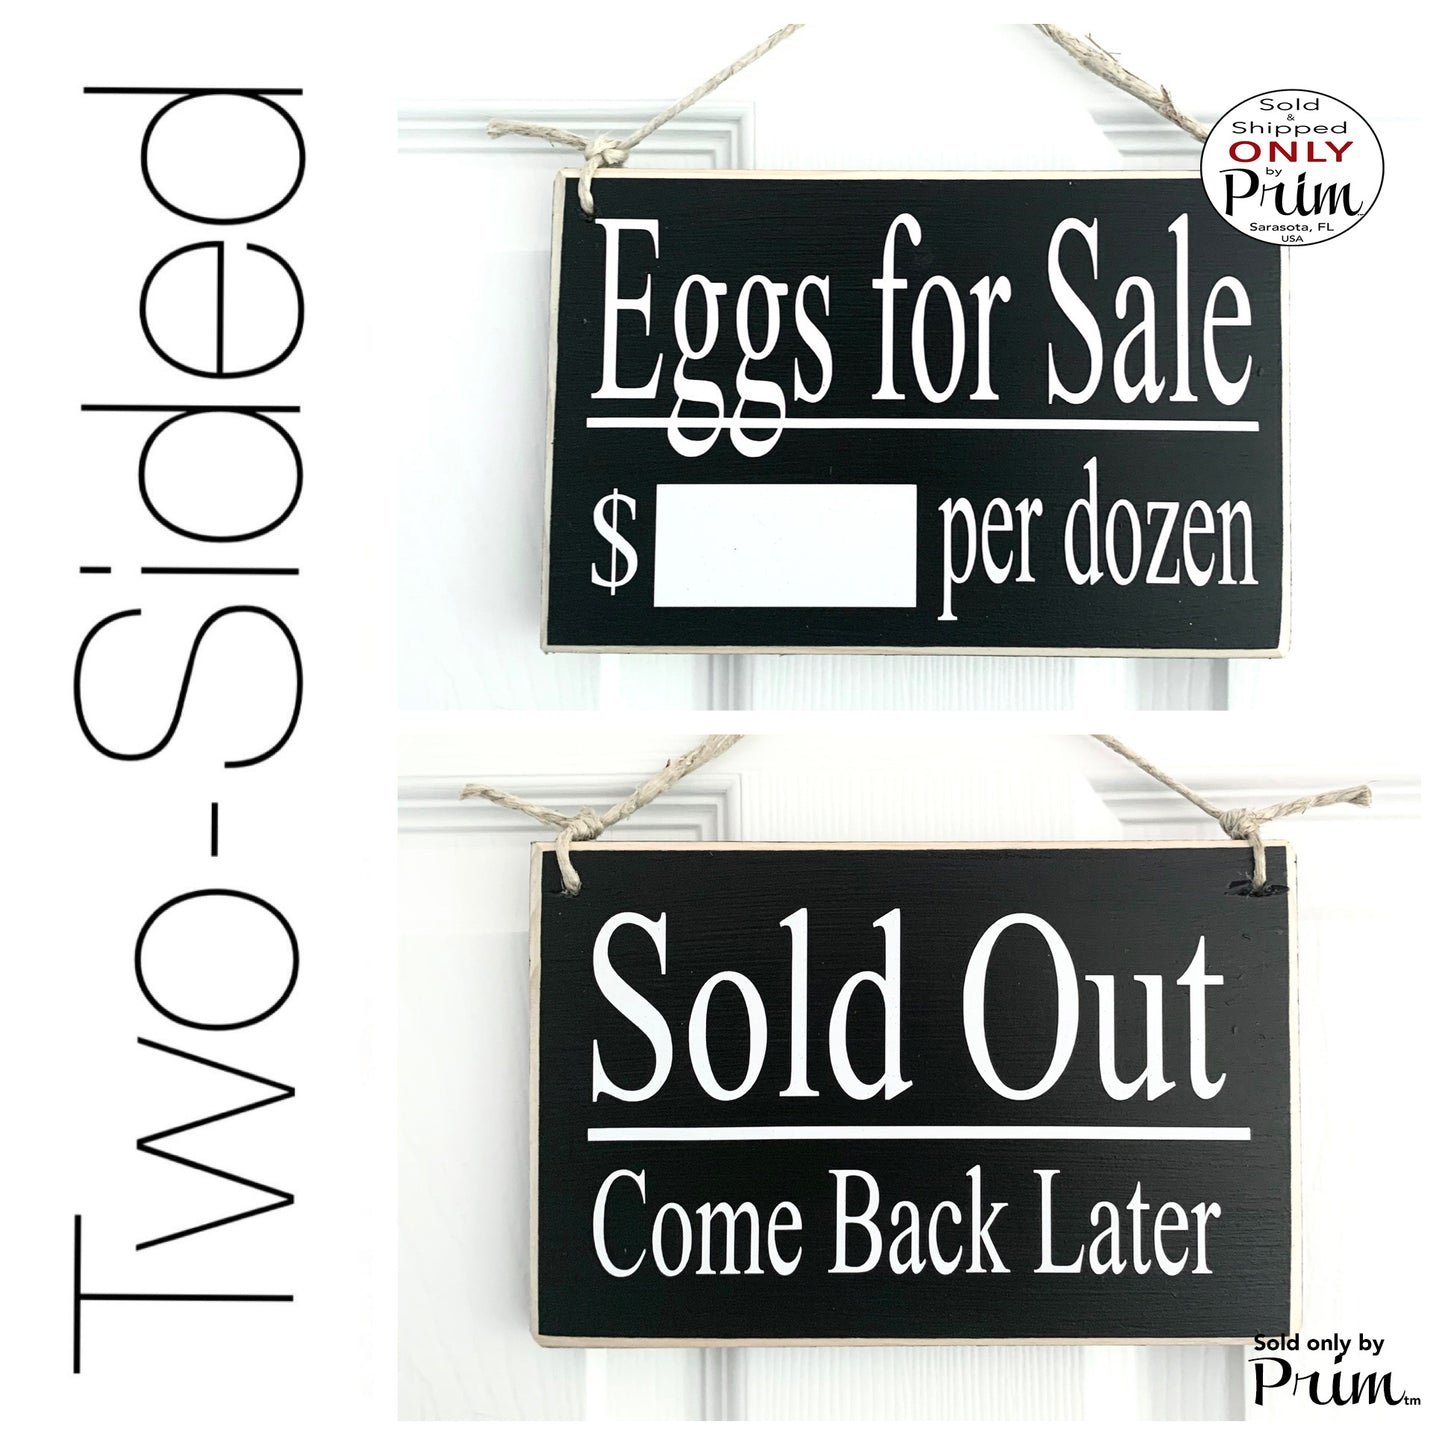 Designs by Prim 8x6 Eggs for Sale Per Dozen Sold Out Come Back Later | Farmers market Farmhouse Chickens Pasteurized Local Grocery Door Plaque